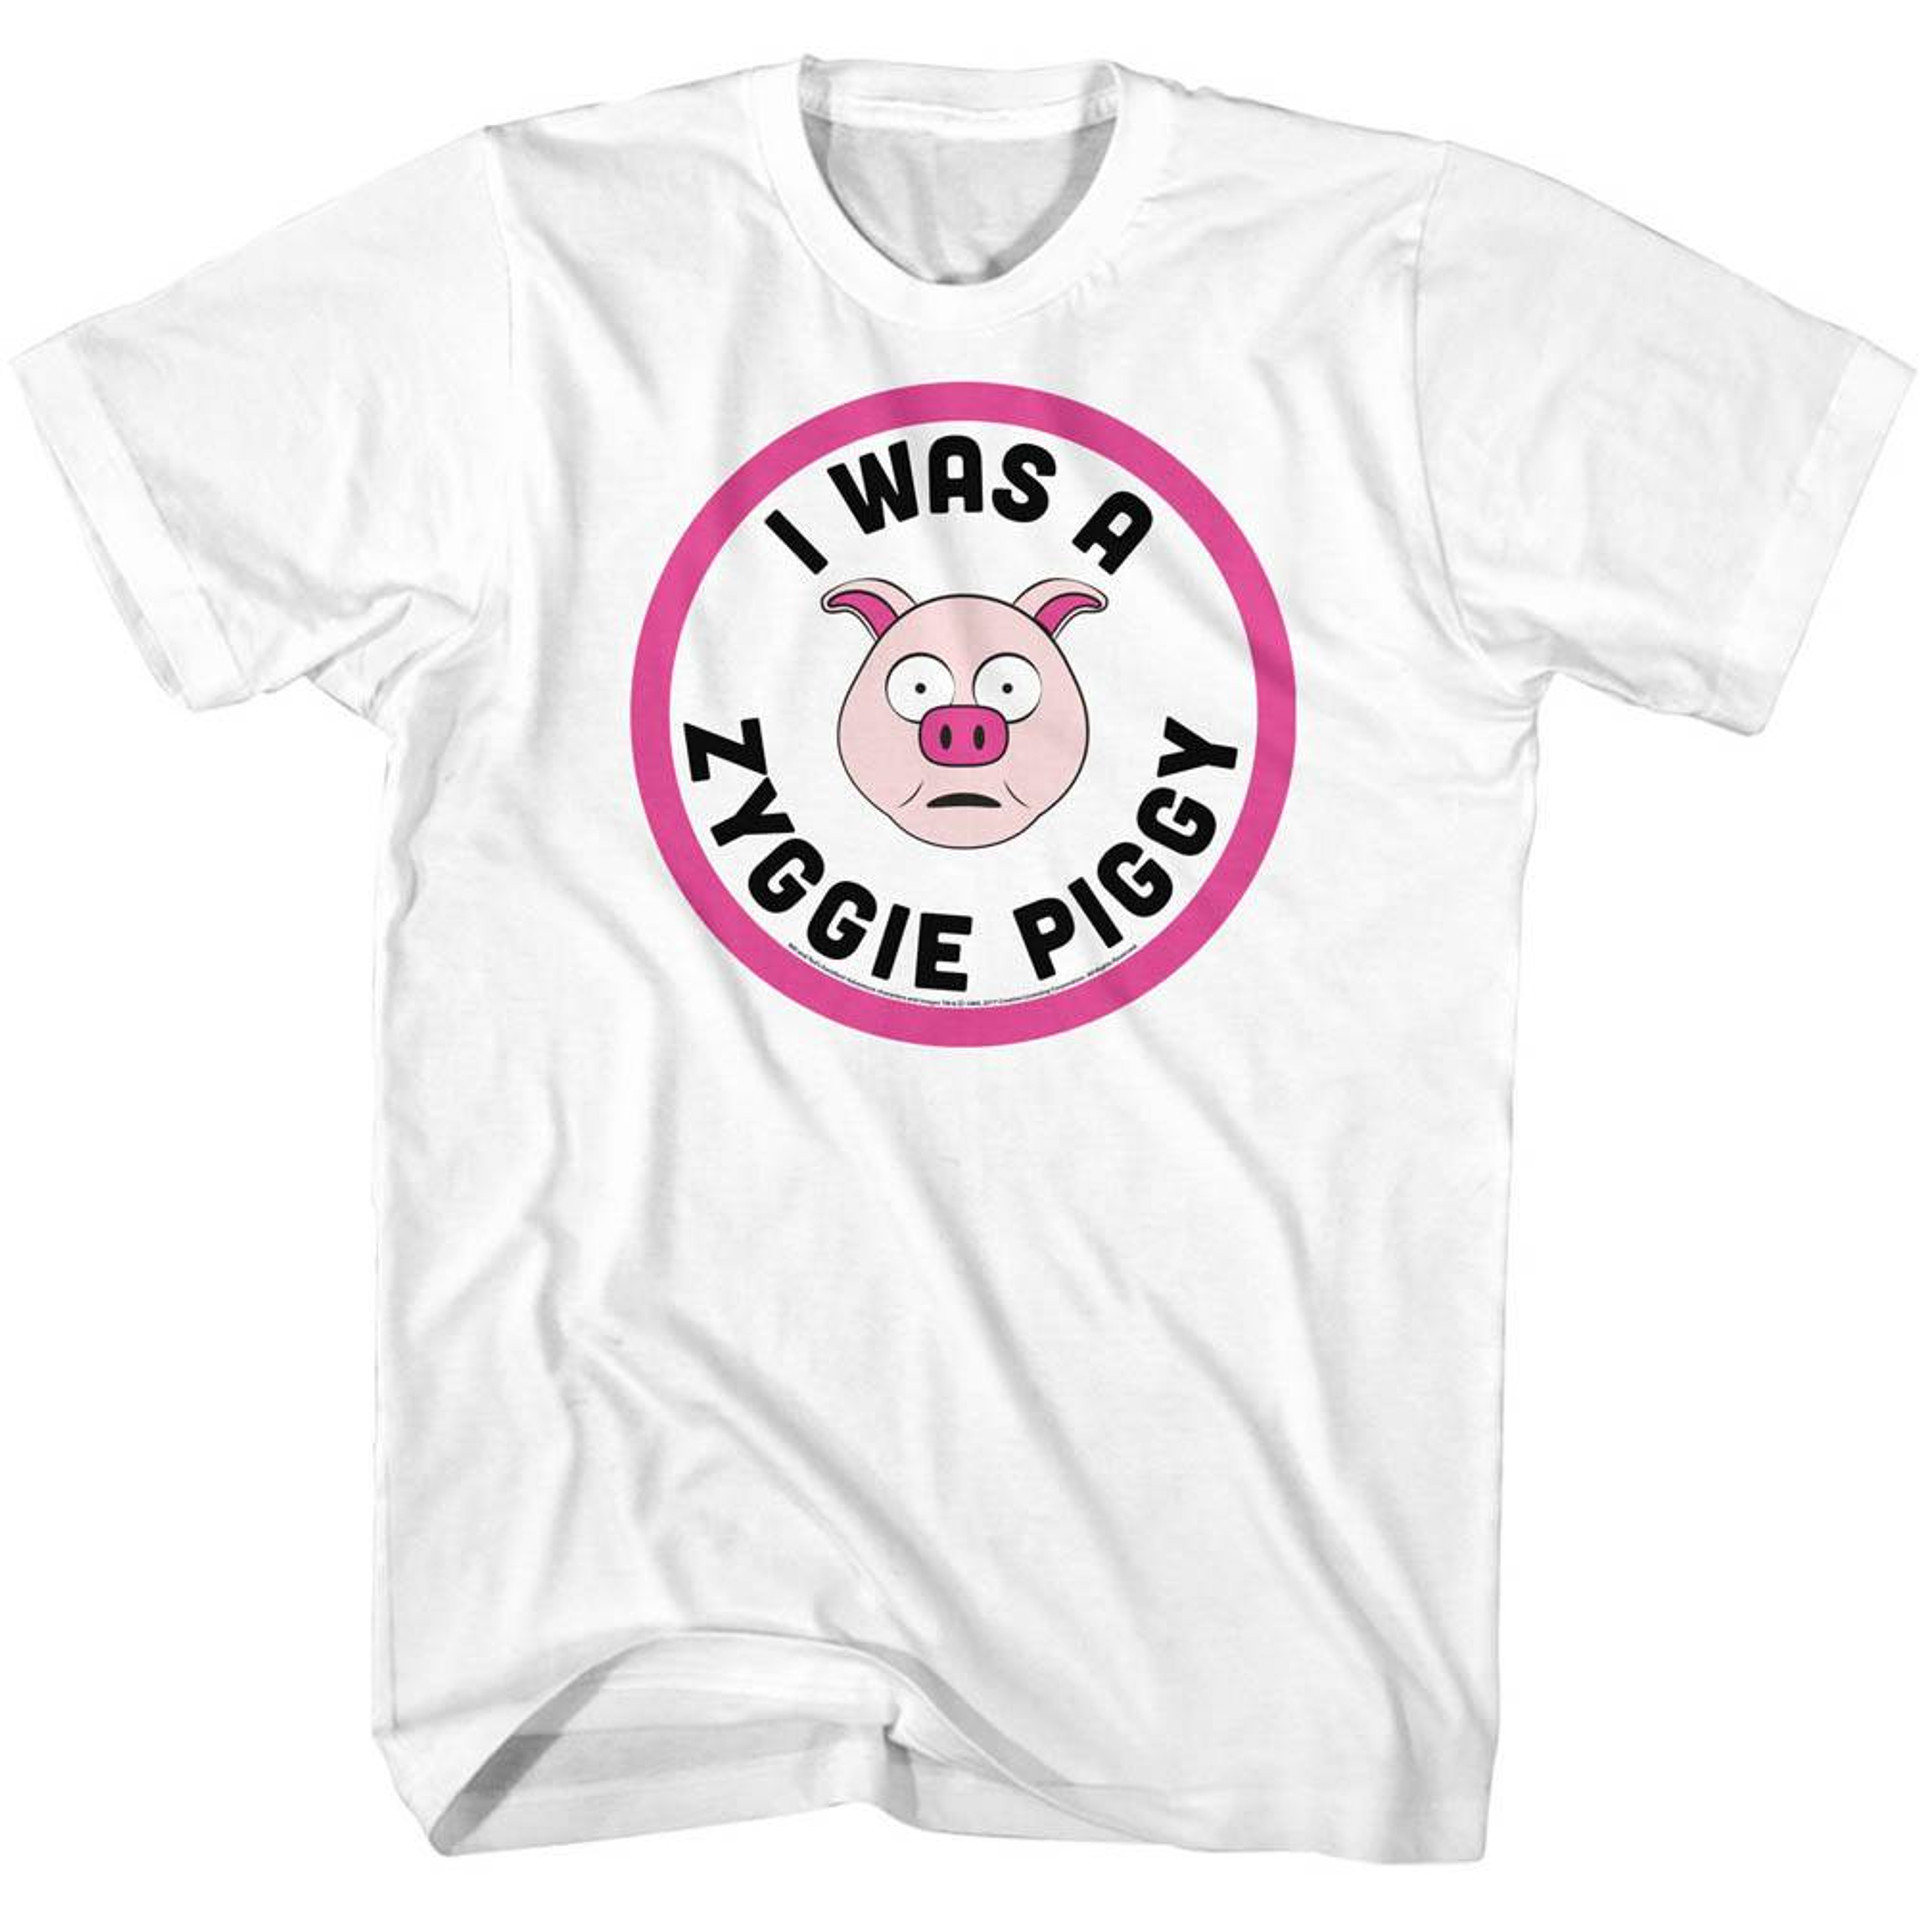 bill and ted zyggie piggy white adult t shirt 1990 n53vm